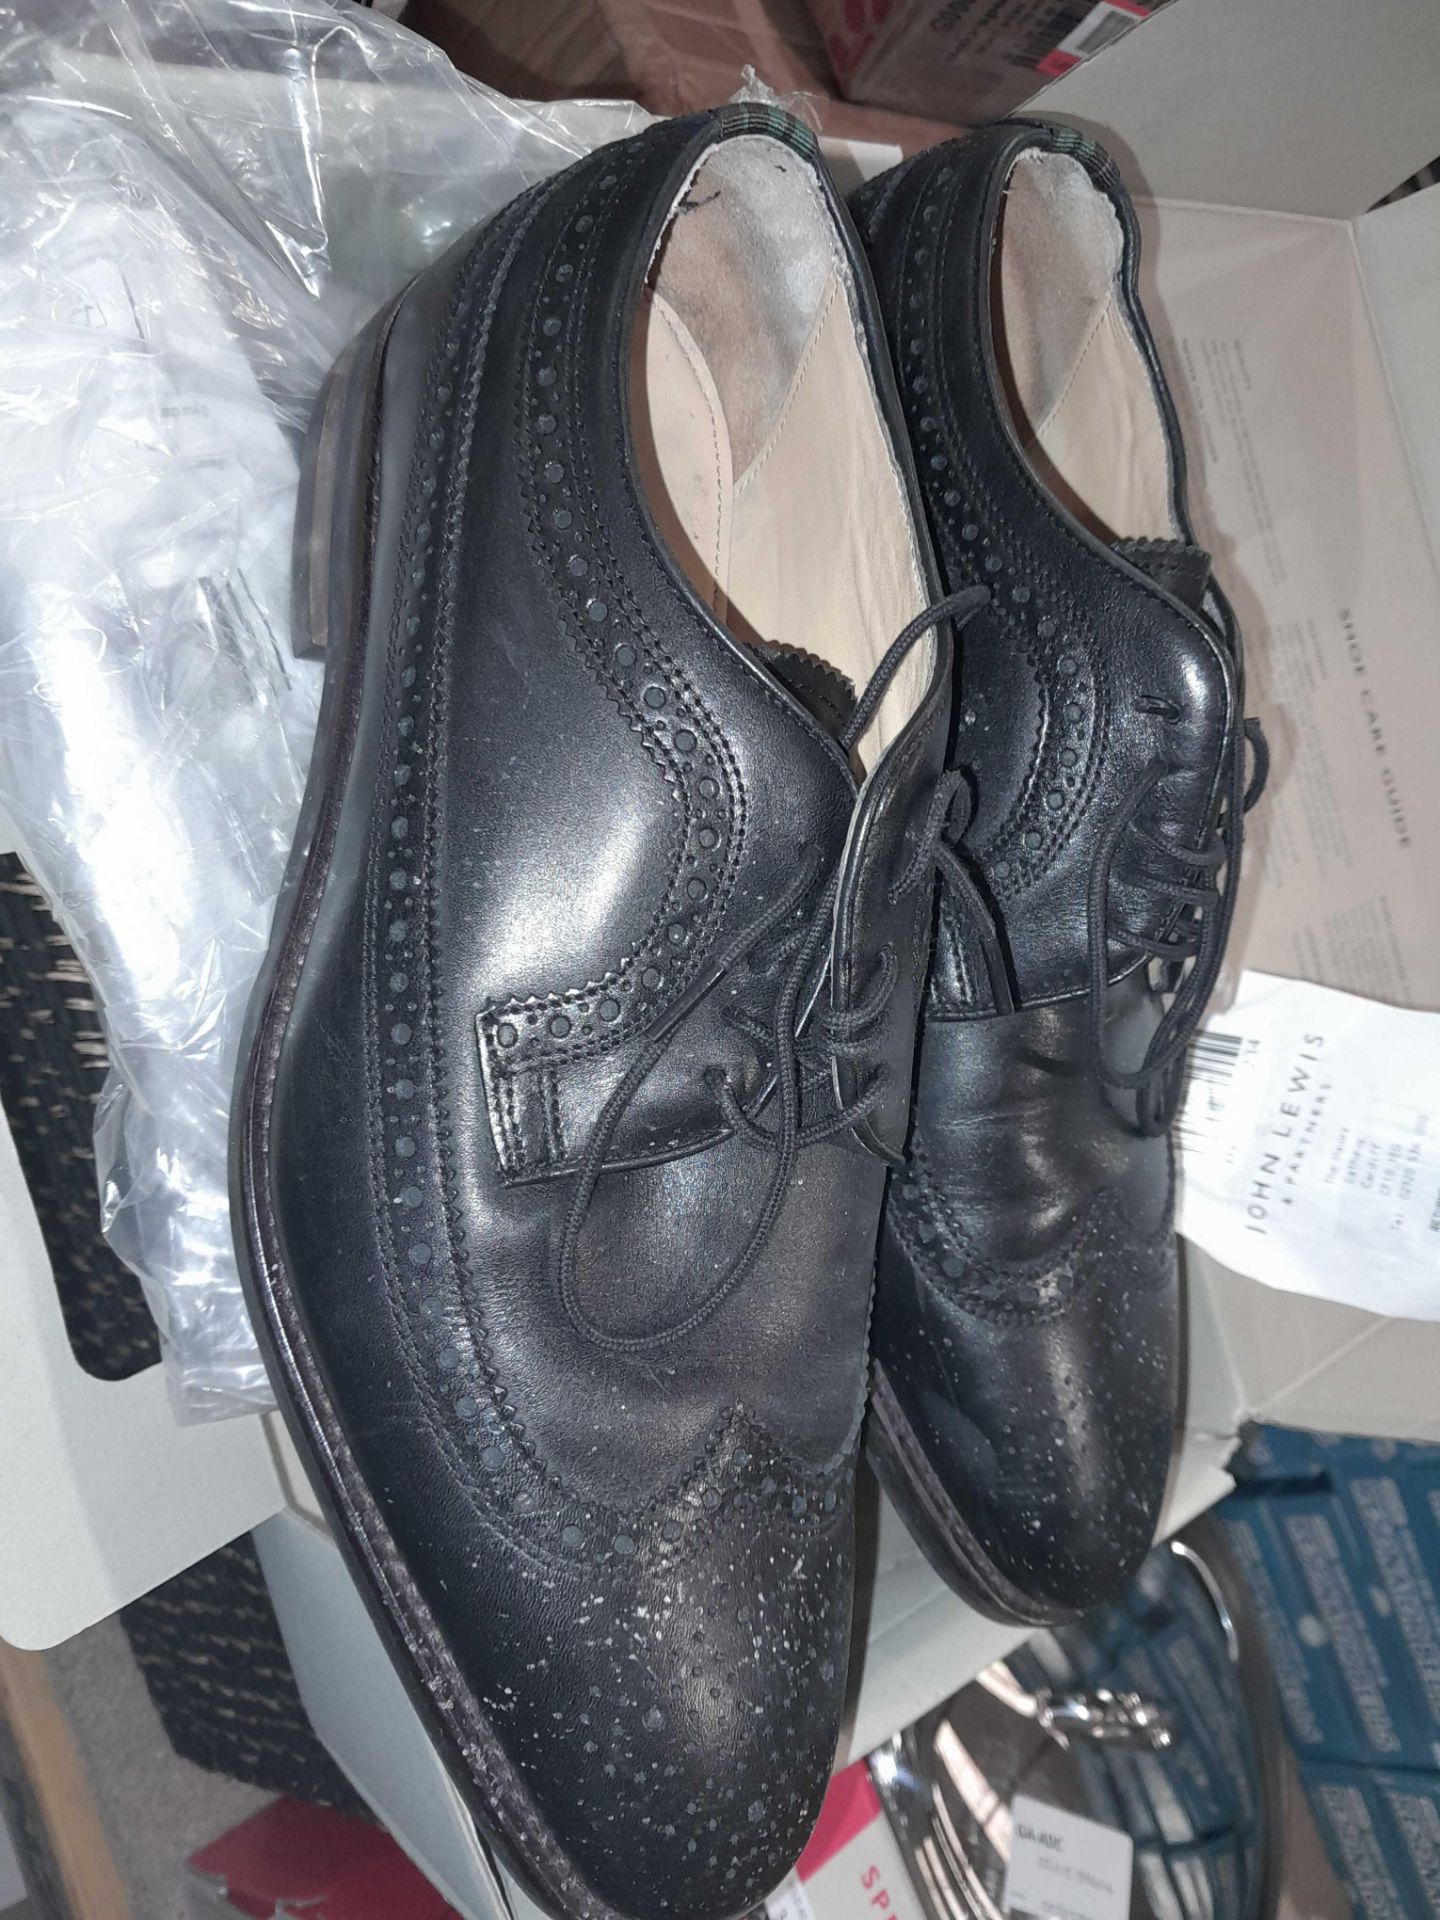 RRP £220 Lot To Contain X3 Items - Black Brogues Sizes 8& 9 , Black Boot Size 8 - Image 3 of 4